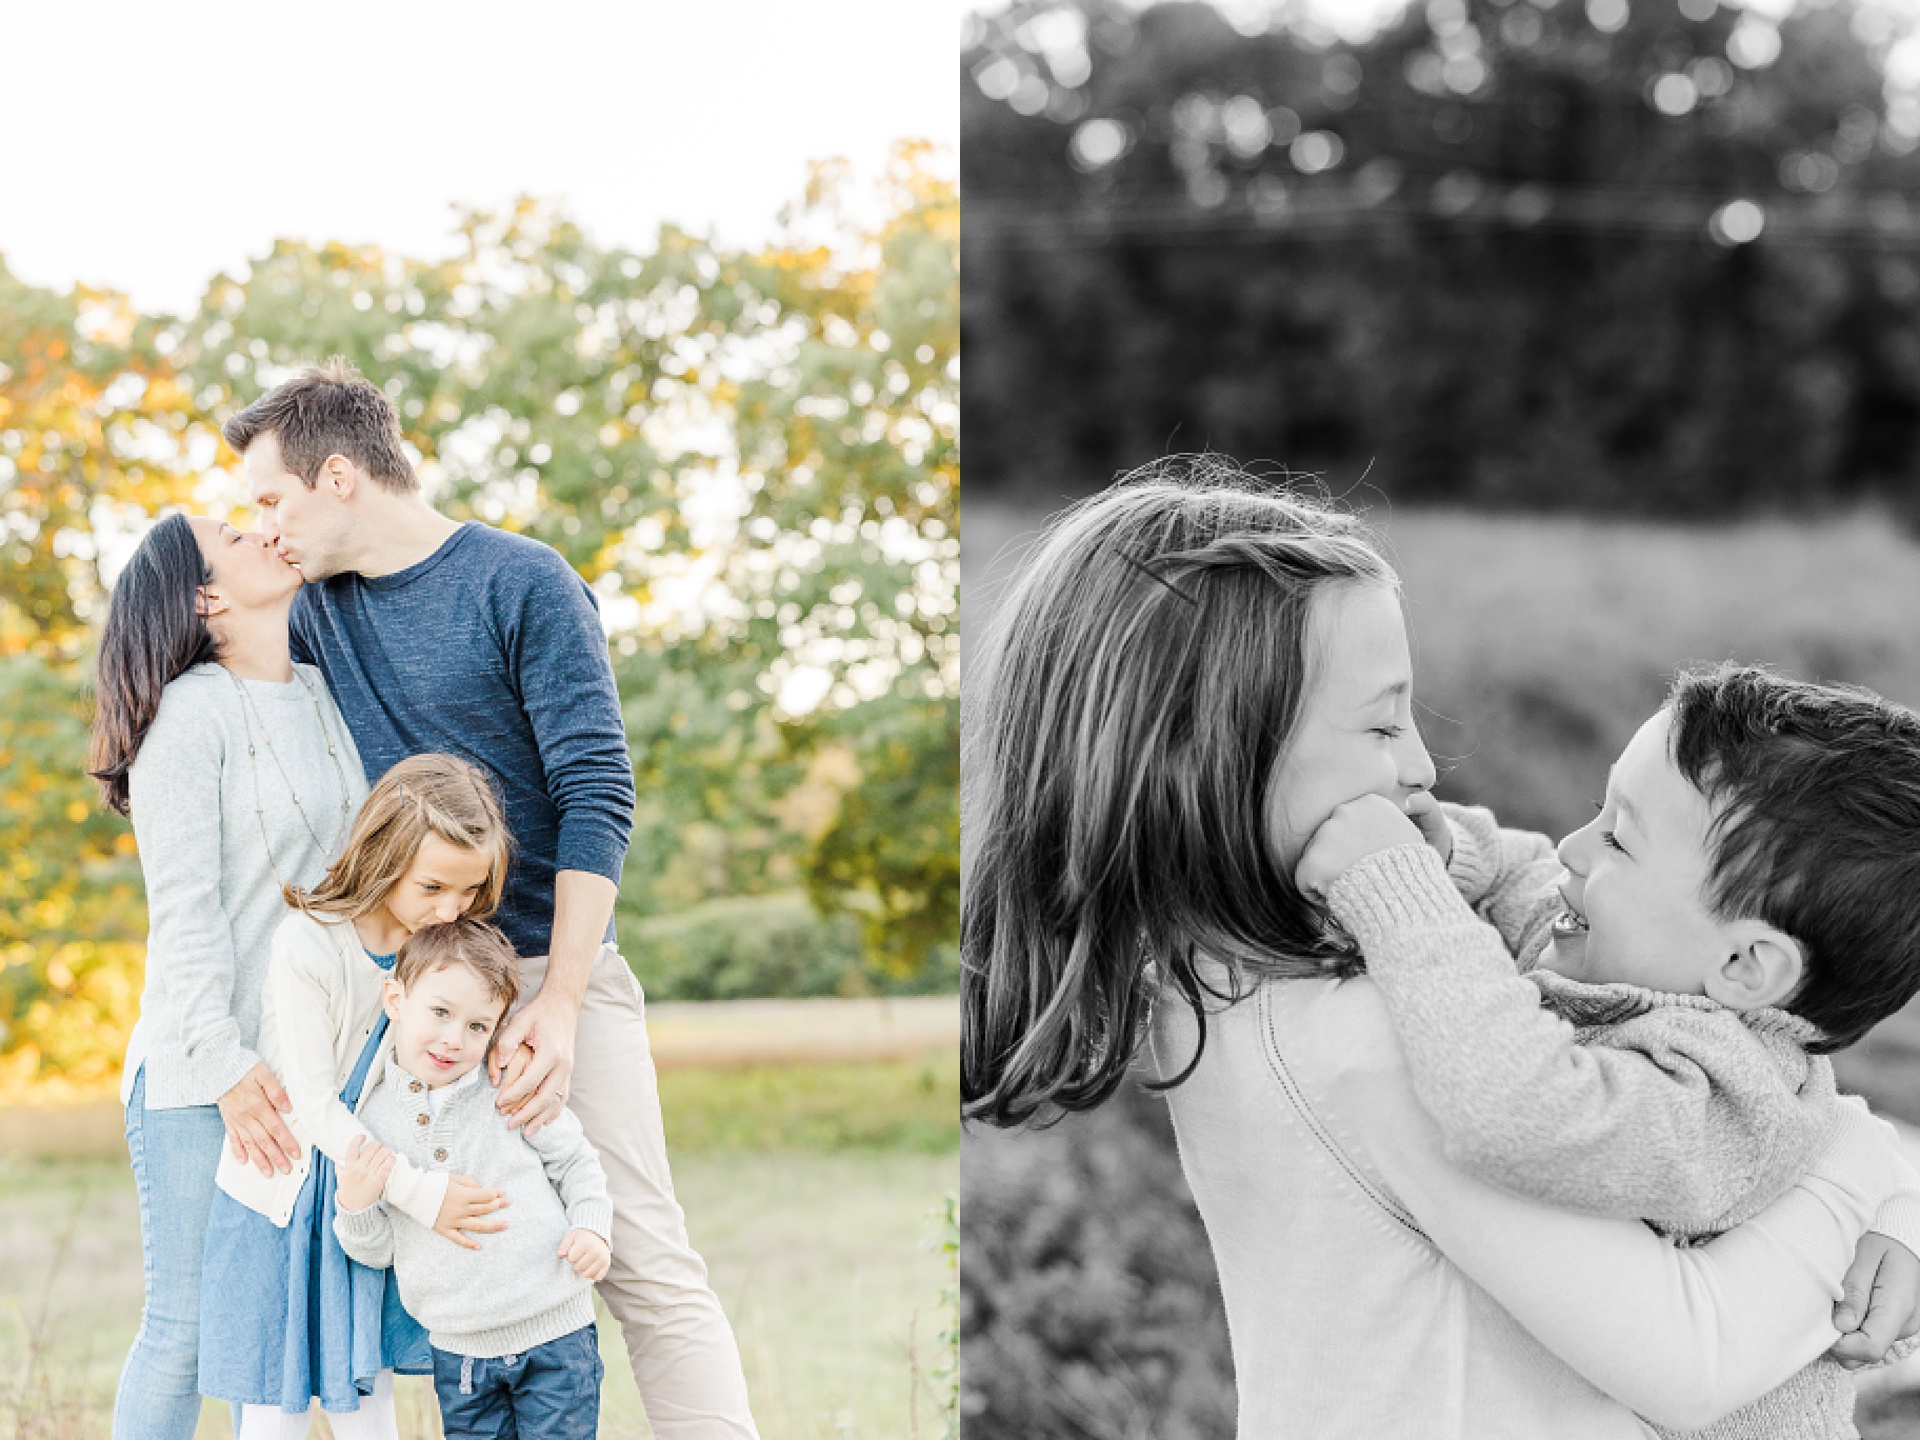 Fall Family Photo Session with Sara Sniderman Photography at Charles River Peninsula in Needham Massachusetts